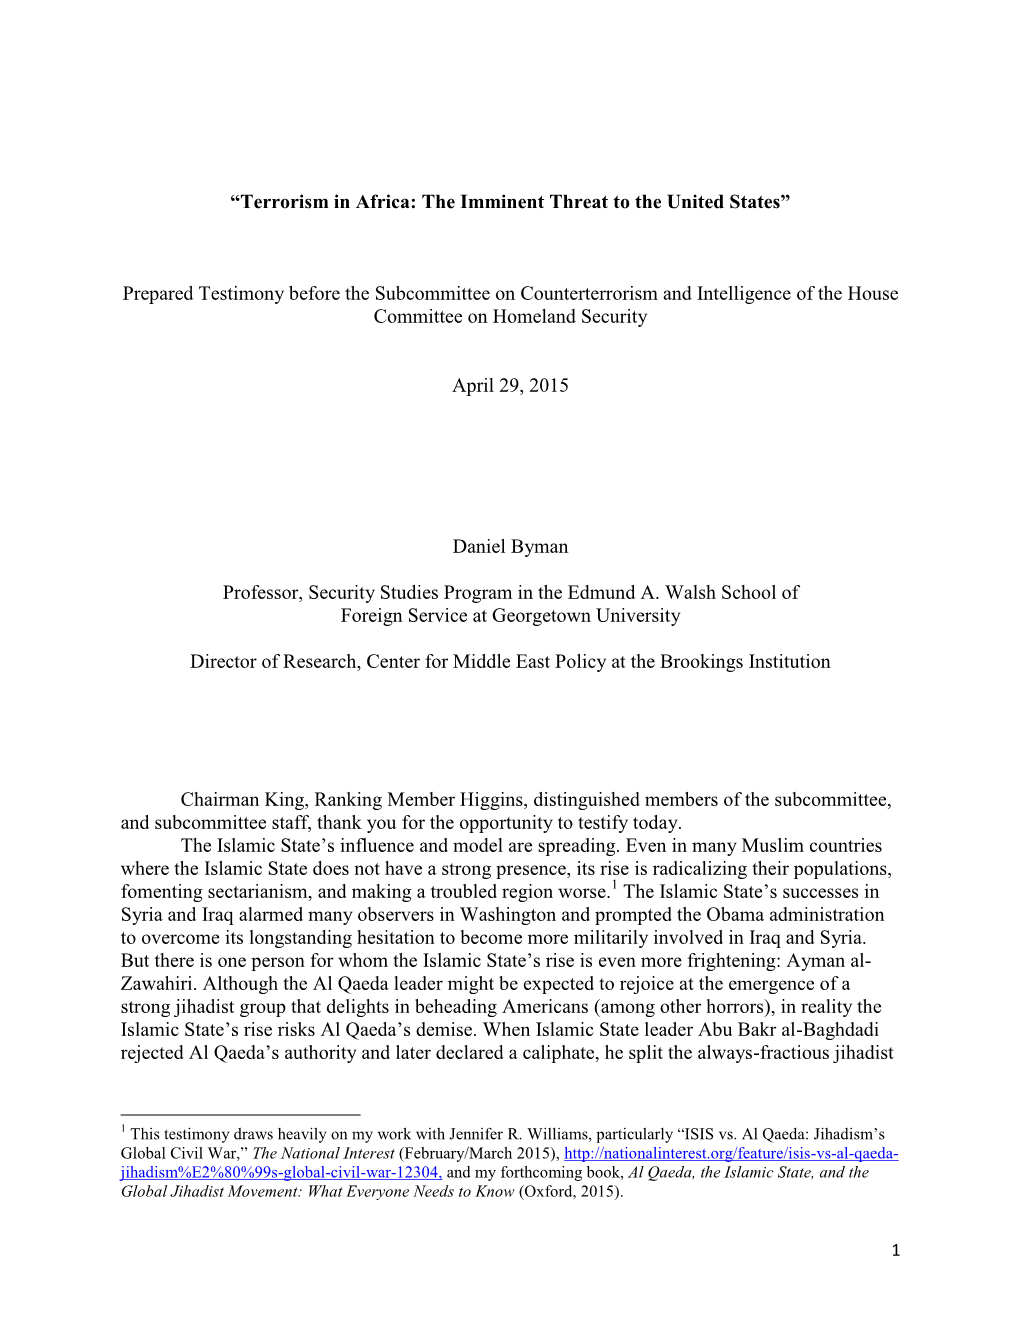 “Terrorism in Africa: the Imminent Threat to the United States” Prepared Testimony Before the Subcommittee on Counterterrori